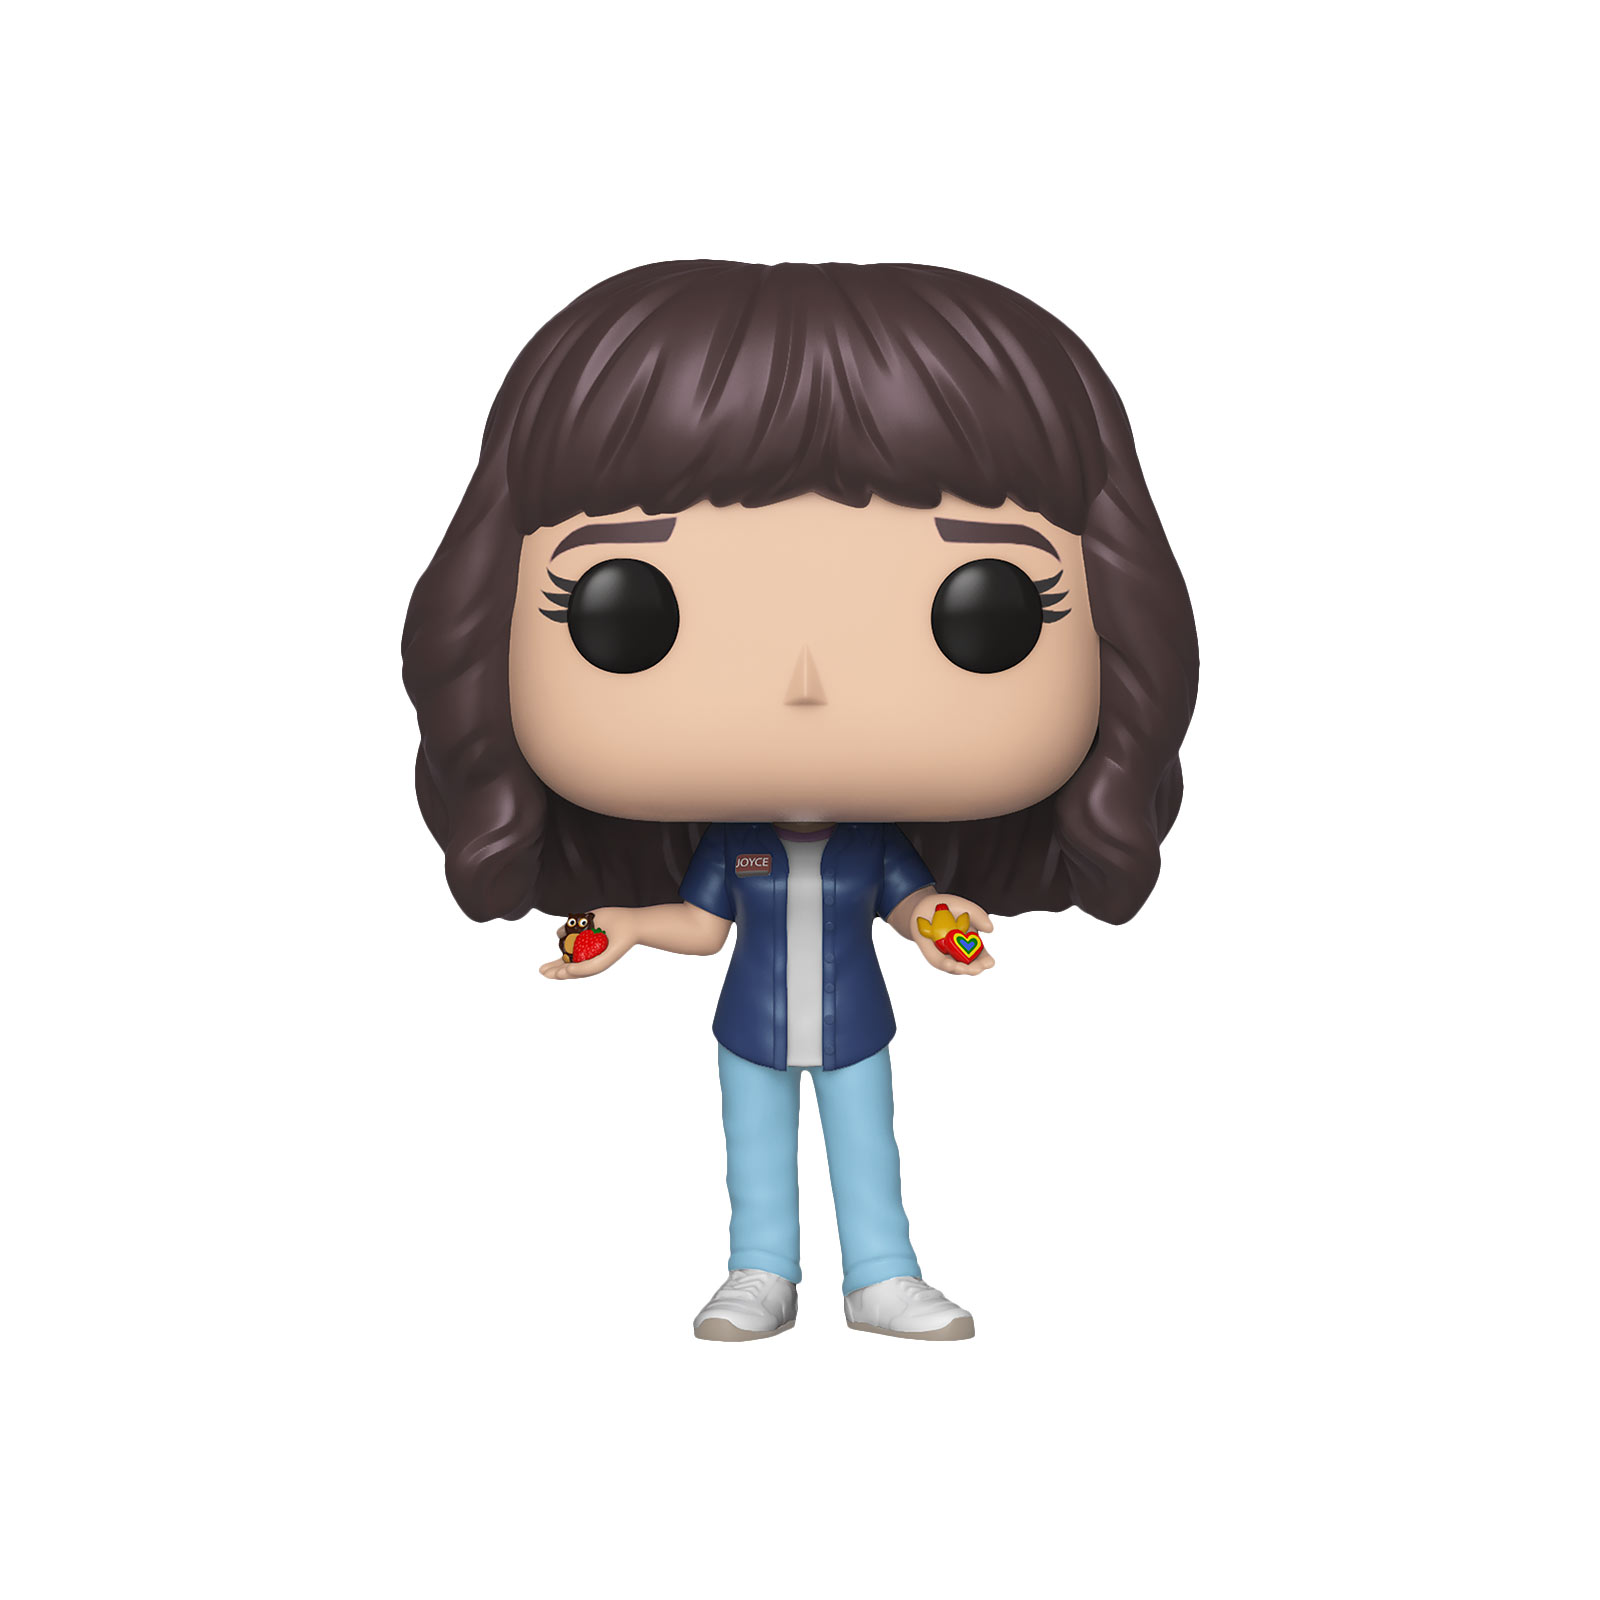 Stranger Things - Joyce with magnets Funko Pop figure